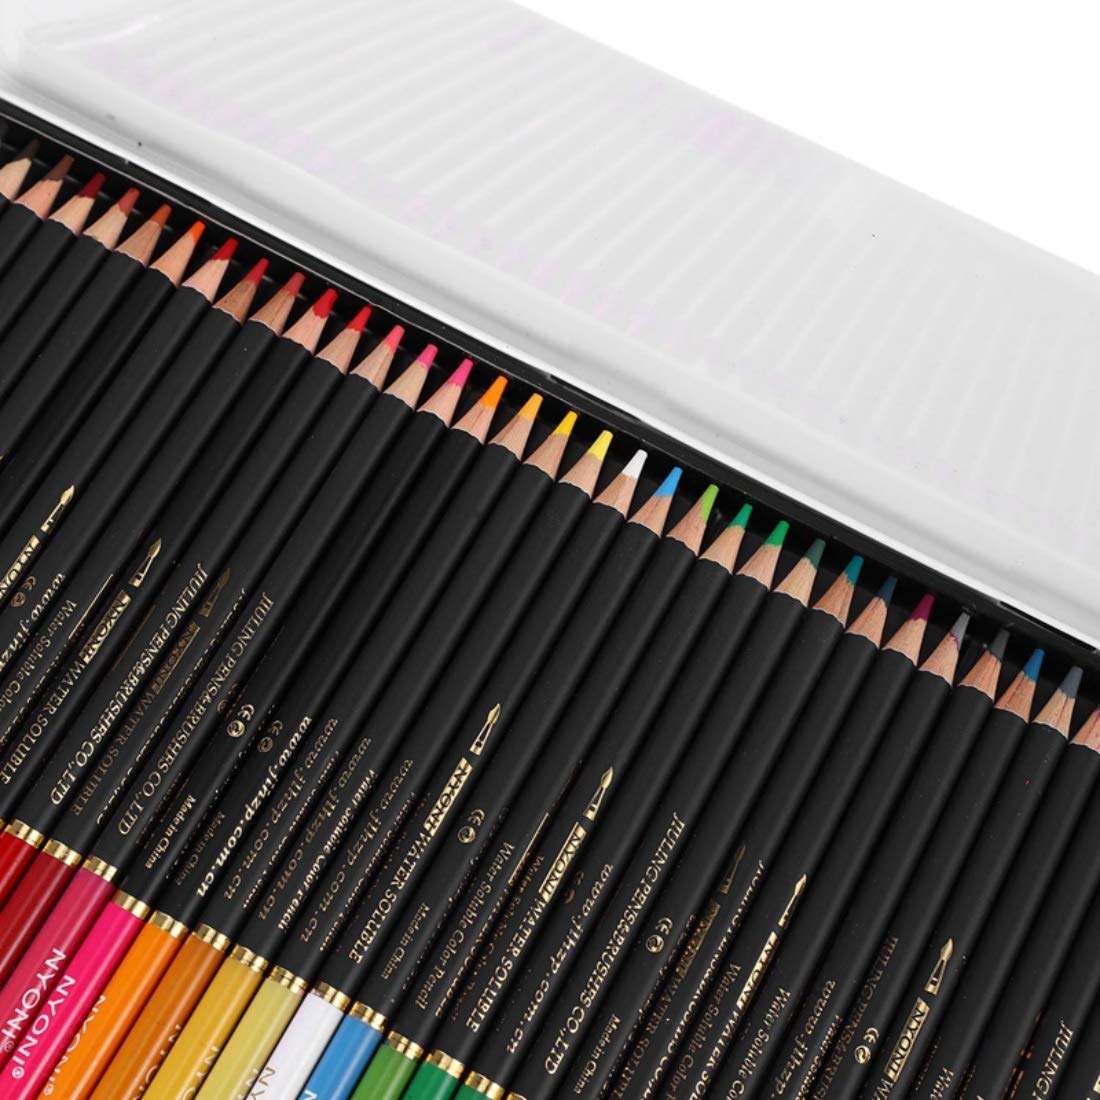 Ondesk Artics Artists' Fine Art Watercolour Pencil Set Tin Box of 36 Assorted Shades | Perfect For Artists', Professionals & Students| Ideal For Sketching, Painting, Drawing, Shading & Illustrations